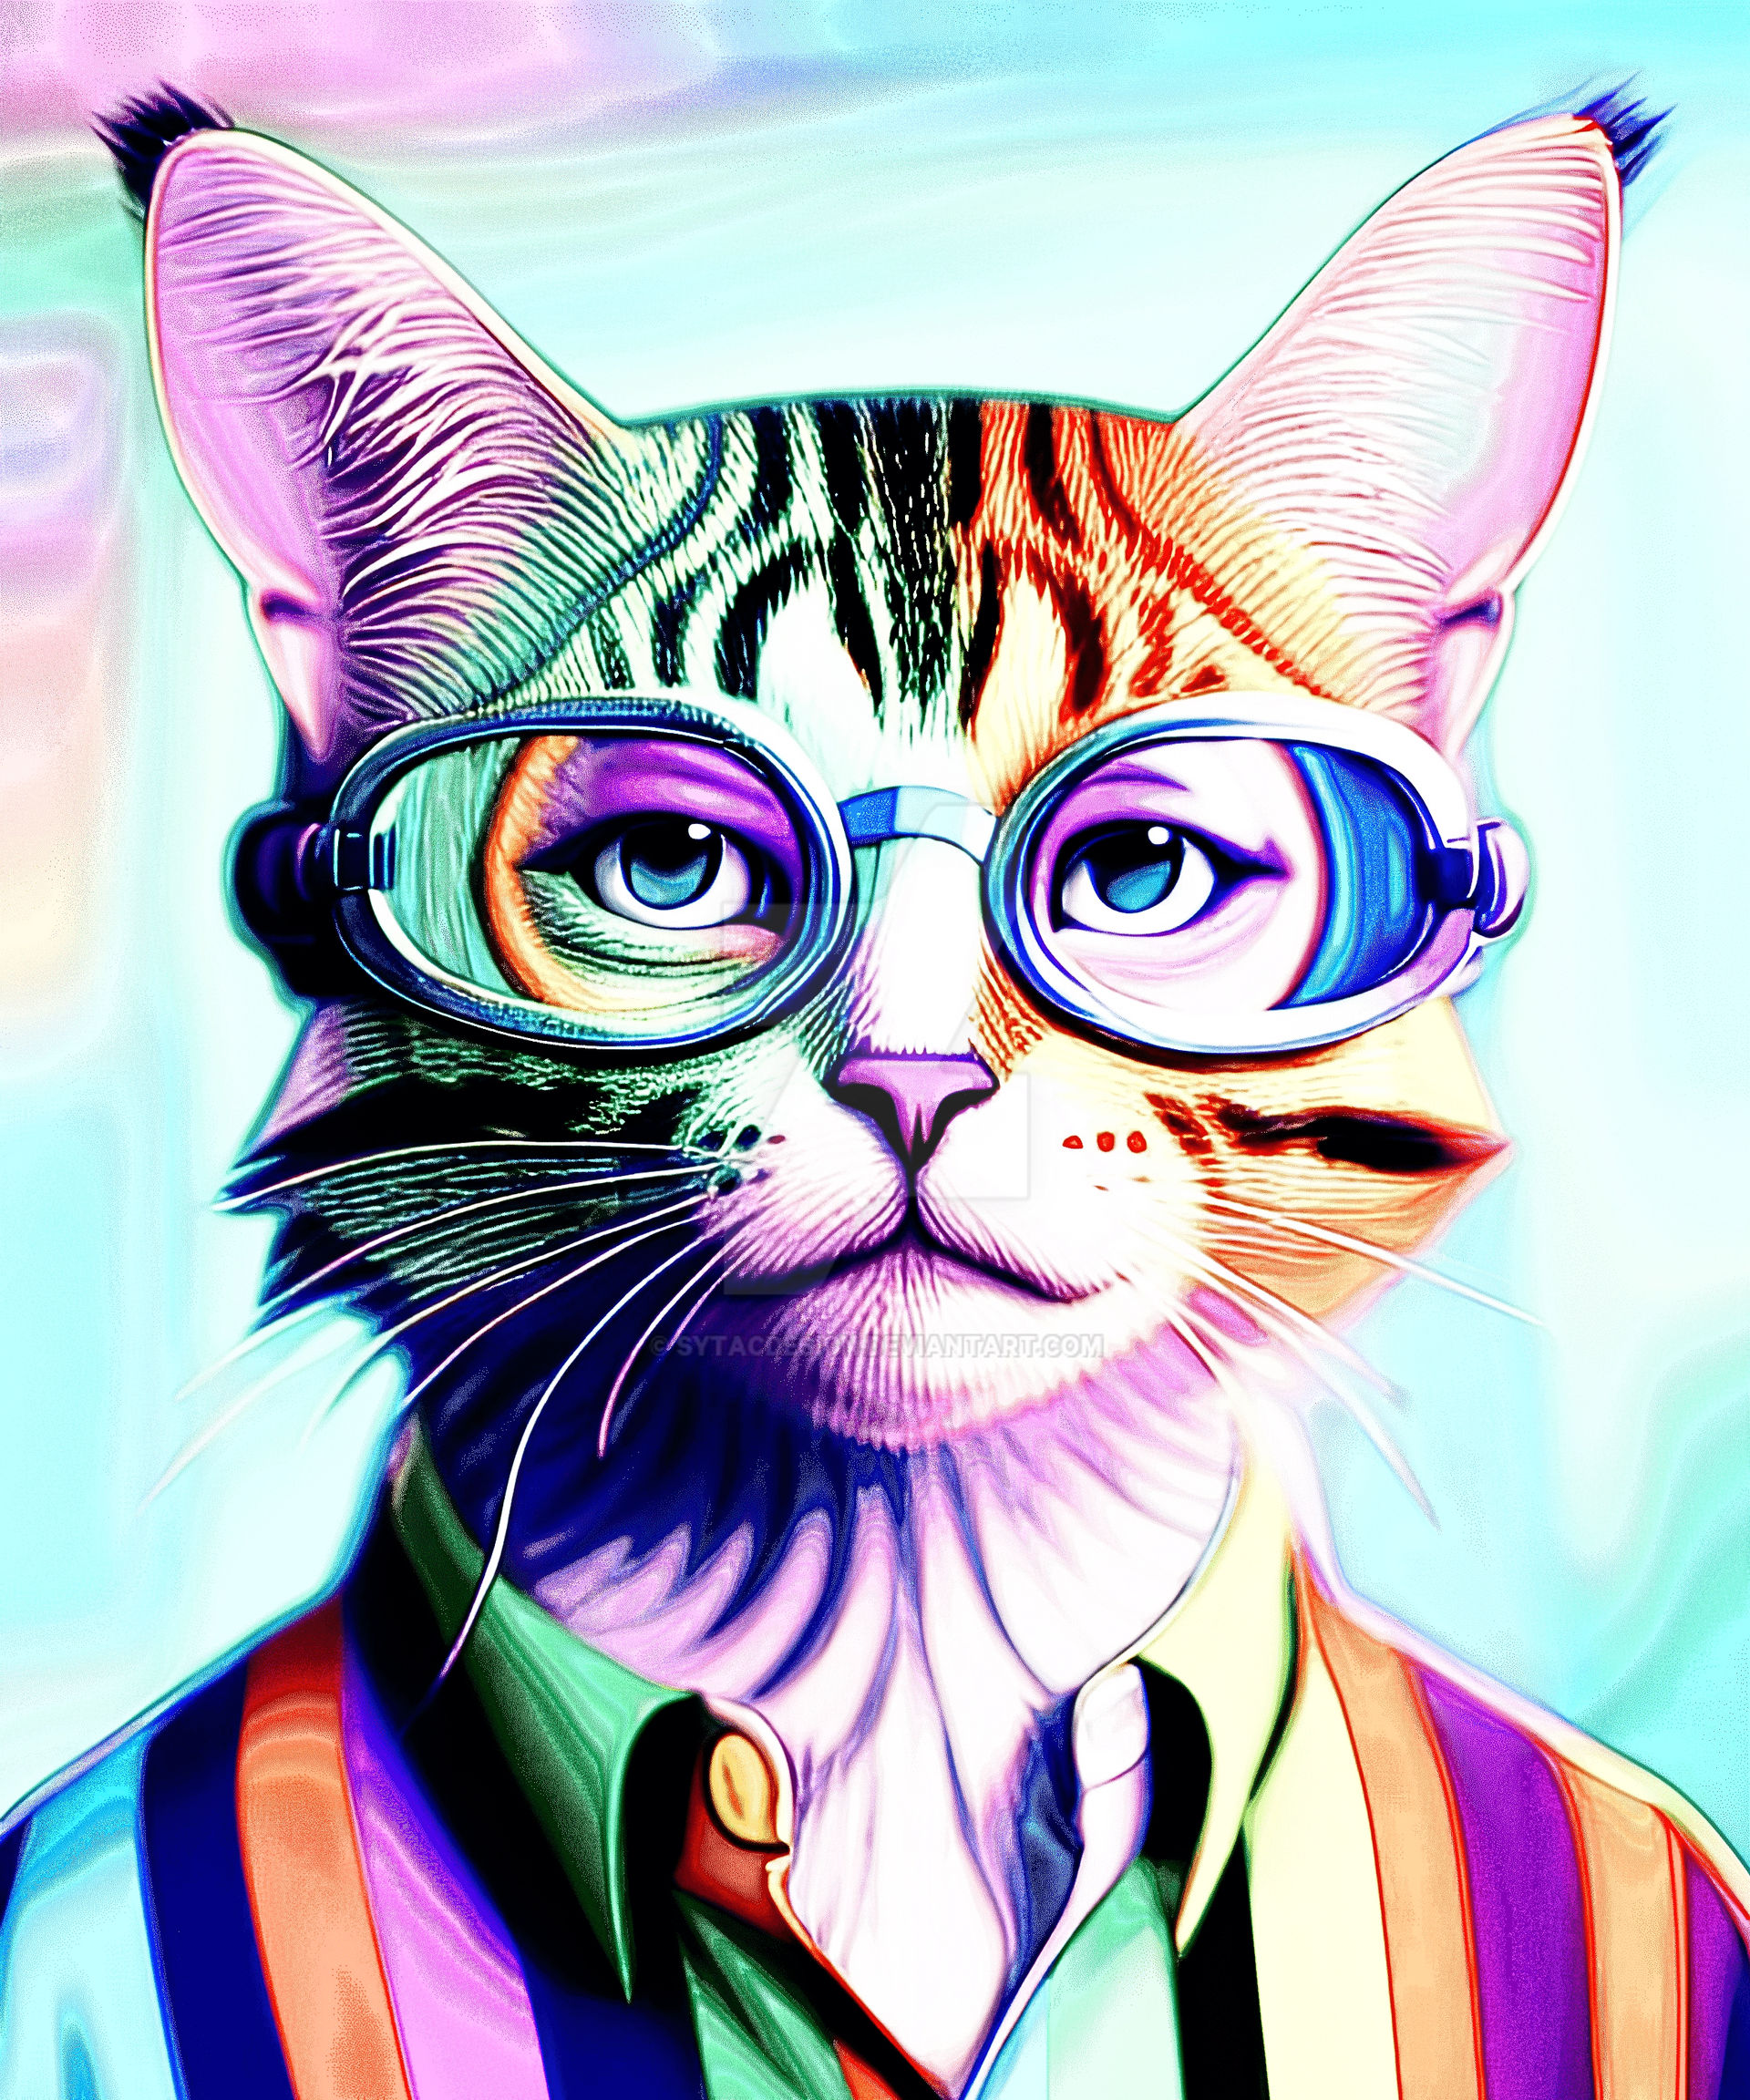 cool Kitty Hip Cool Sunglasses Cat by sytacdesign on DeviantArt